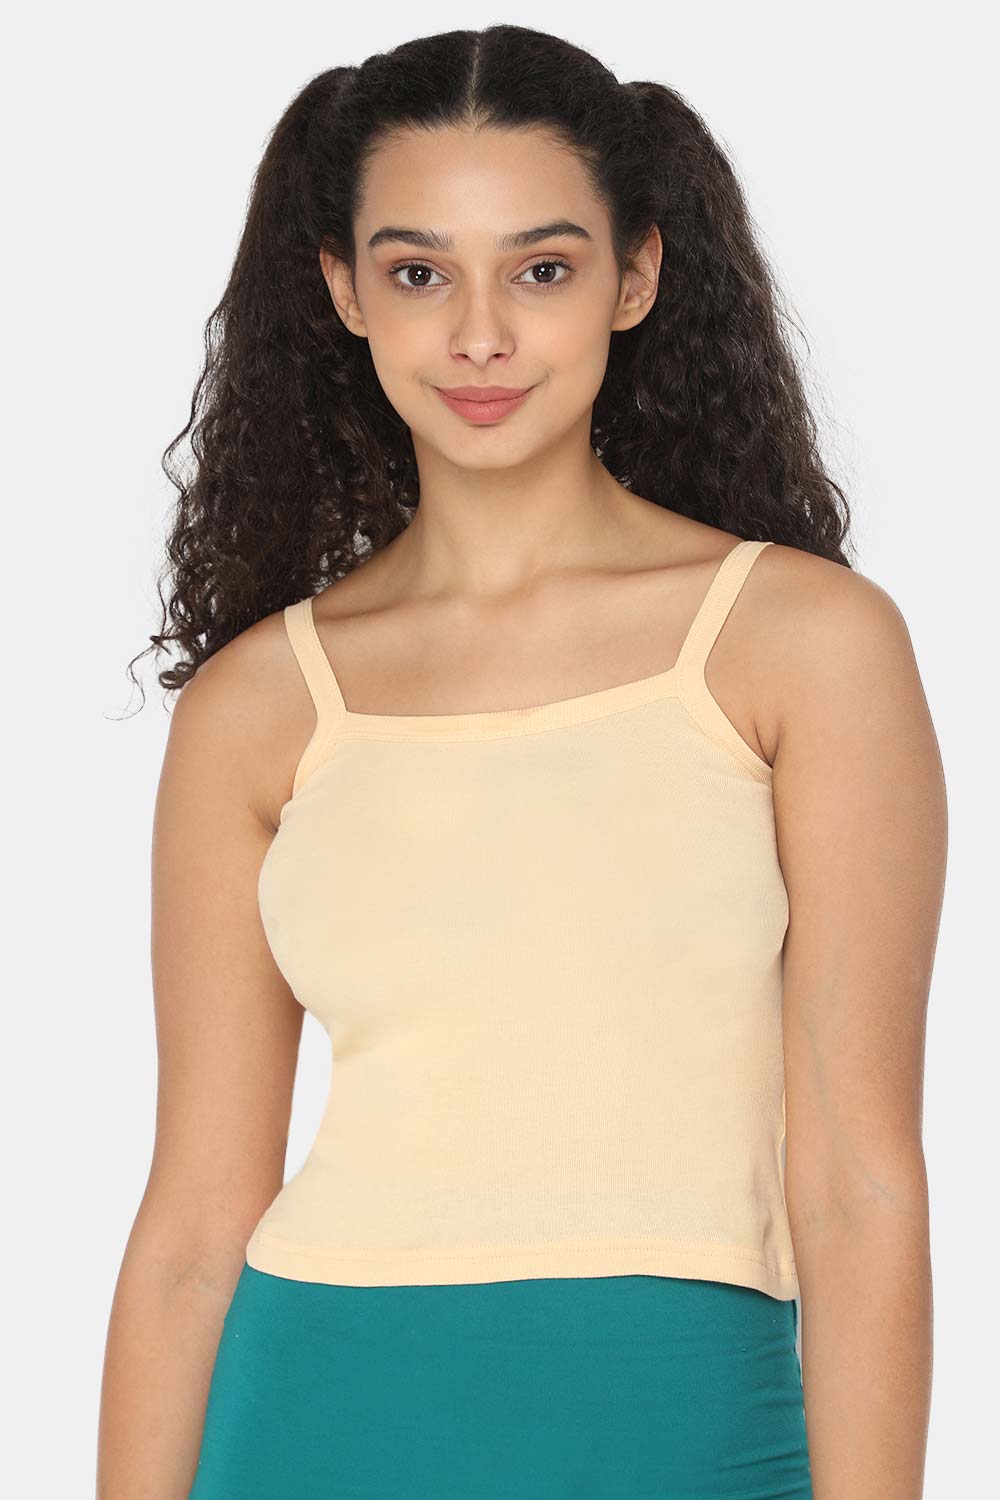 Intimacy Camisole-Slip Special Combo Pack - In01 - Pack of 3 - C34